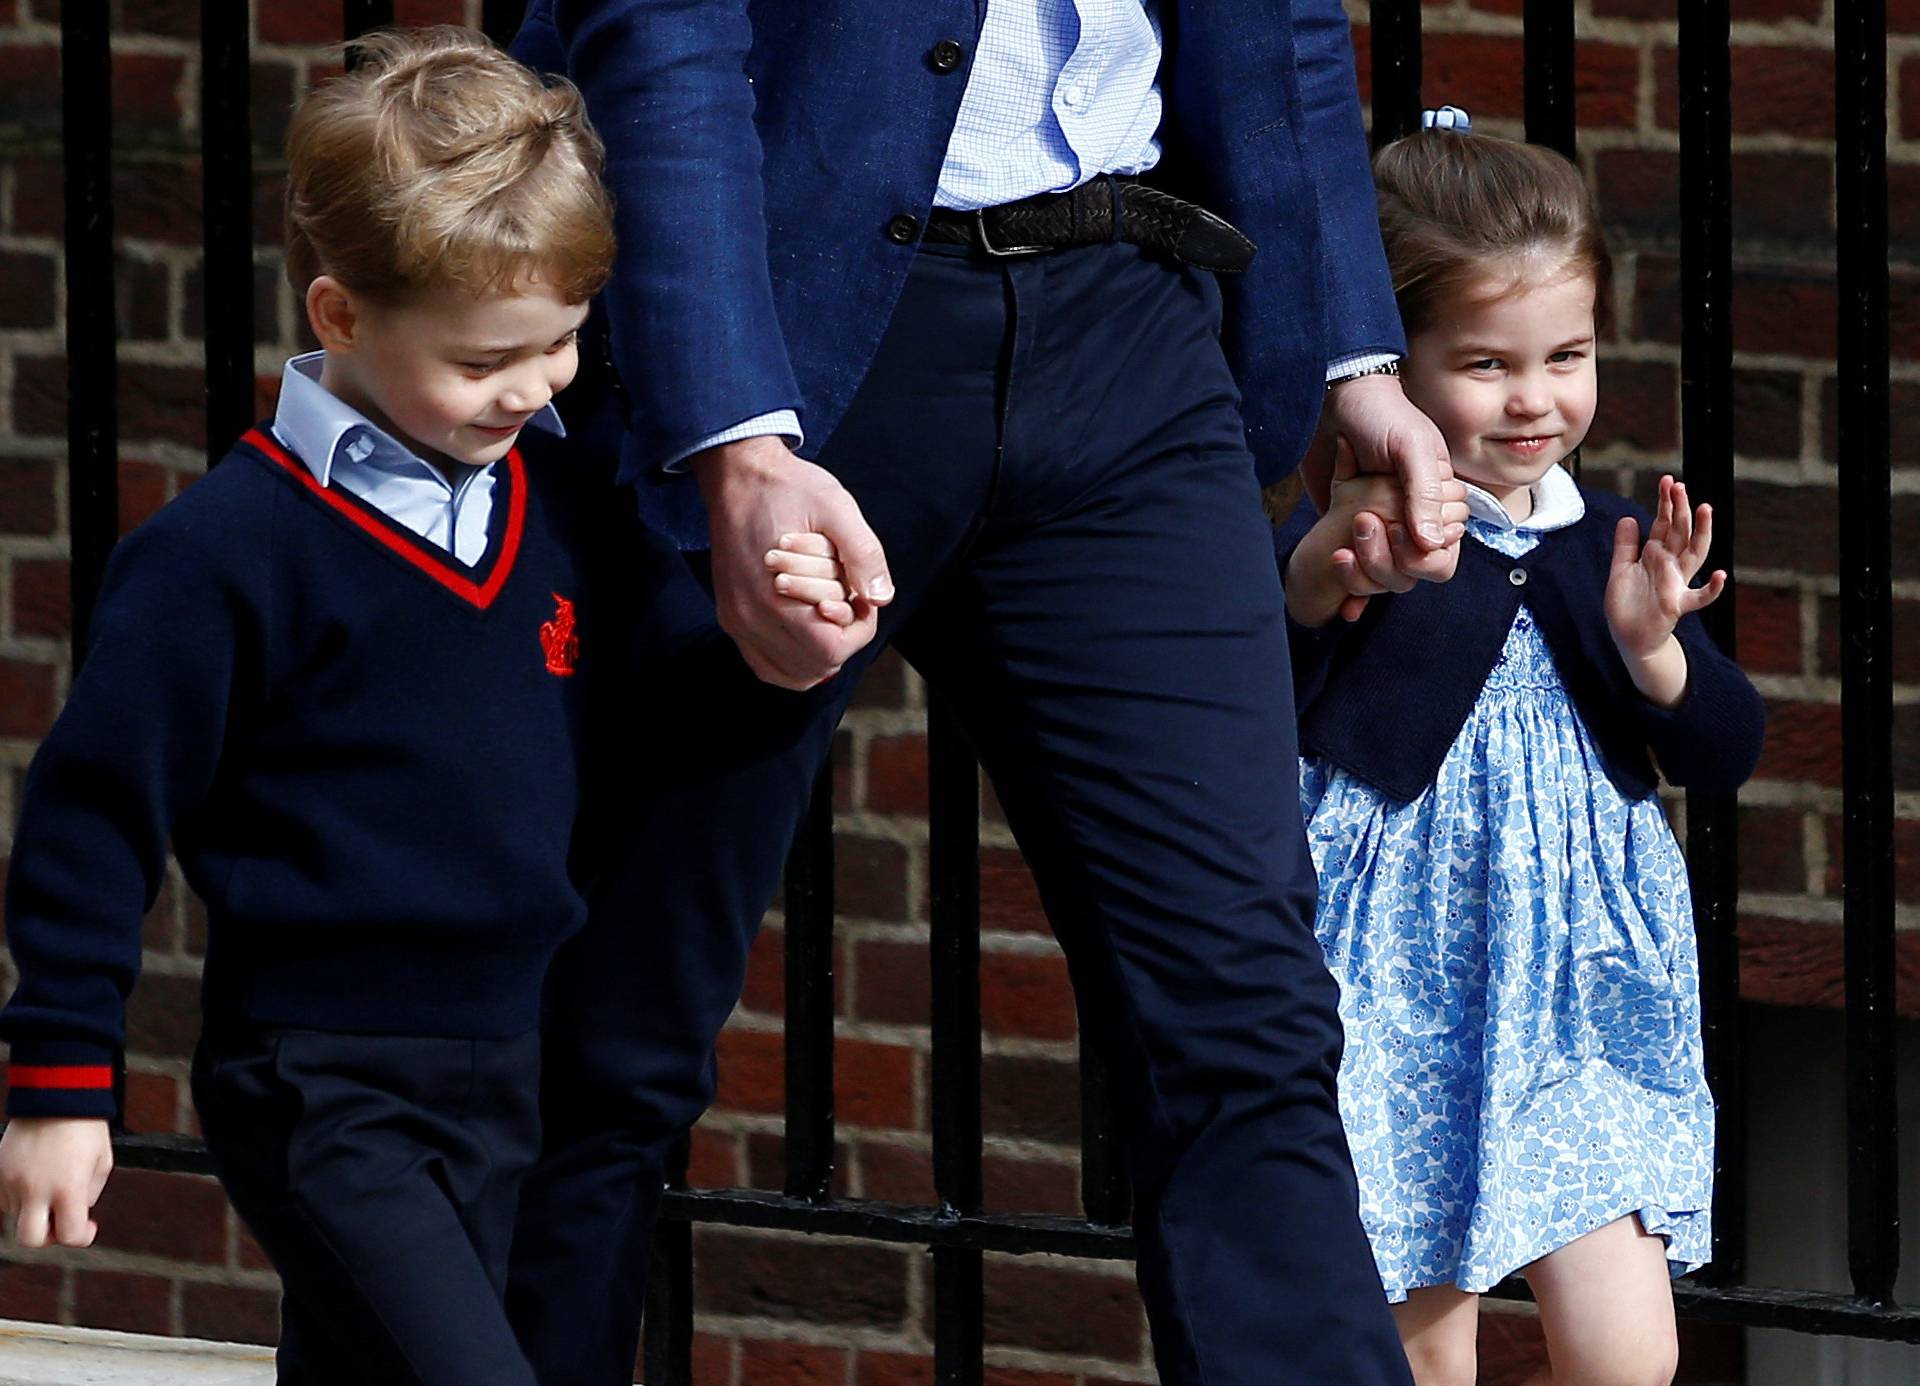 Britain's Prince William arrives at the Lindo Wing of St Mary's Hospital with his children Prince George and Princess Charlotte after his wife Catherine, the Duchess of Cambridge, gave birth to a son, in London